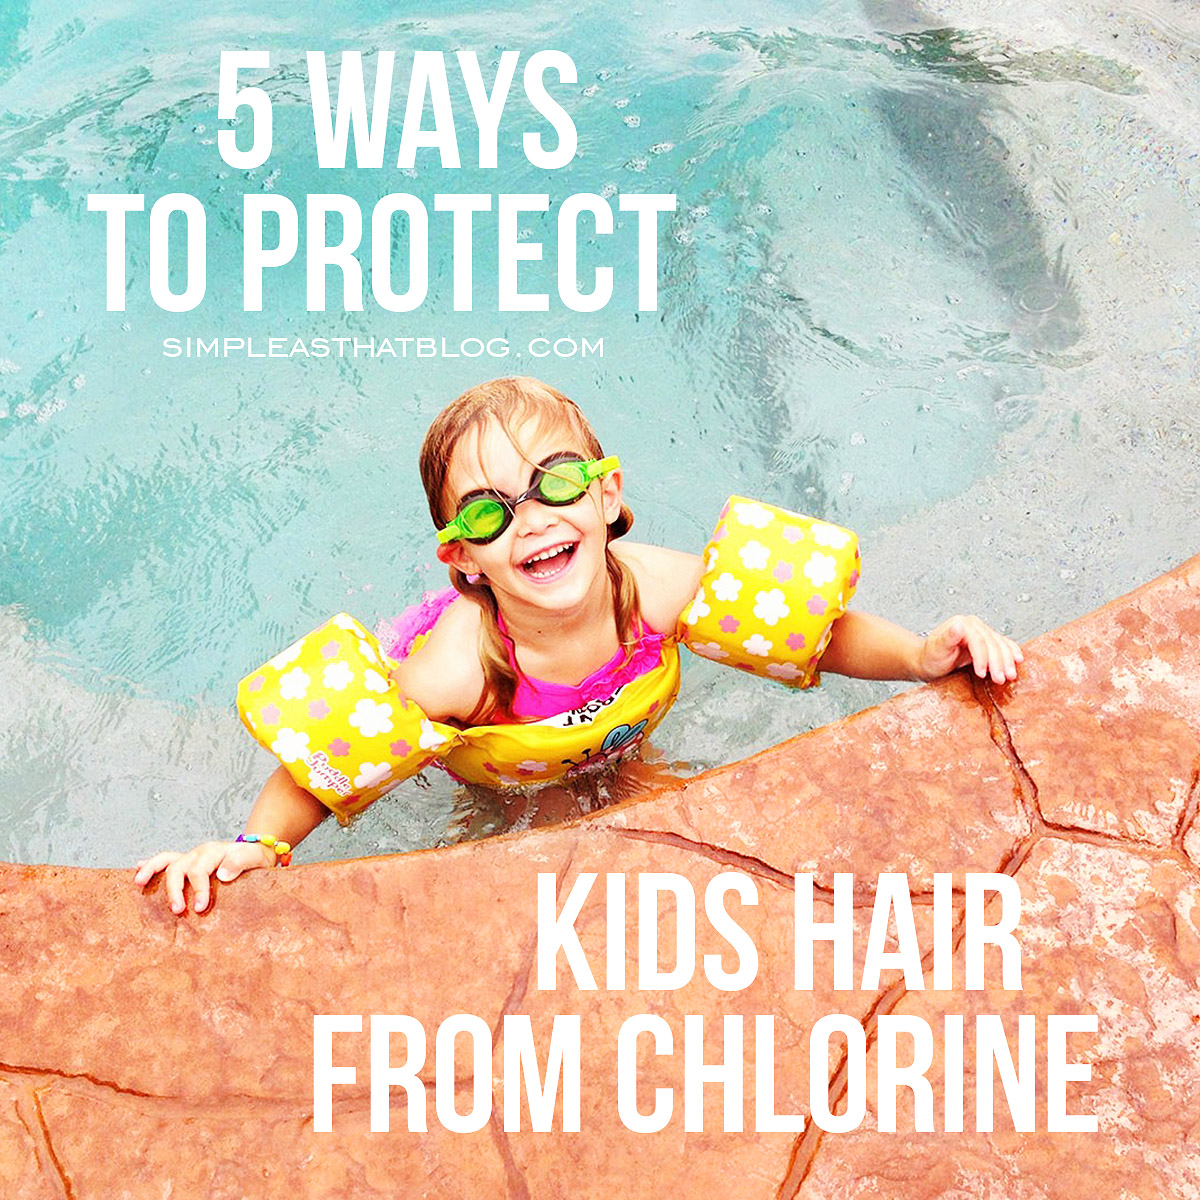 5 Ways to Protect Kids Hair from Chlorine